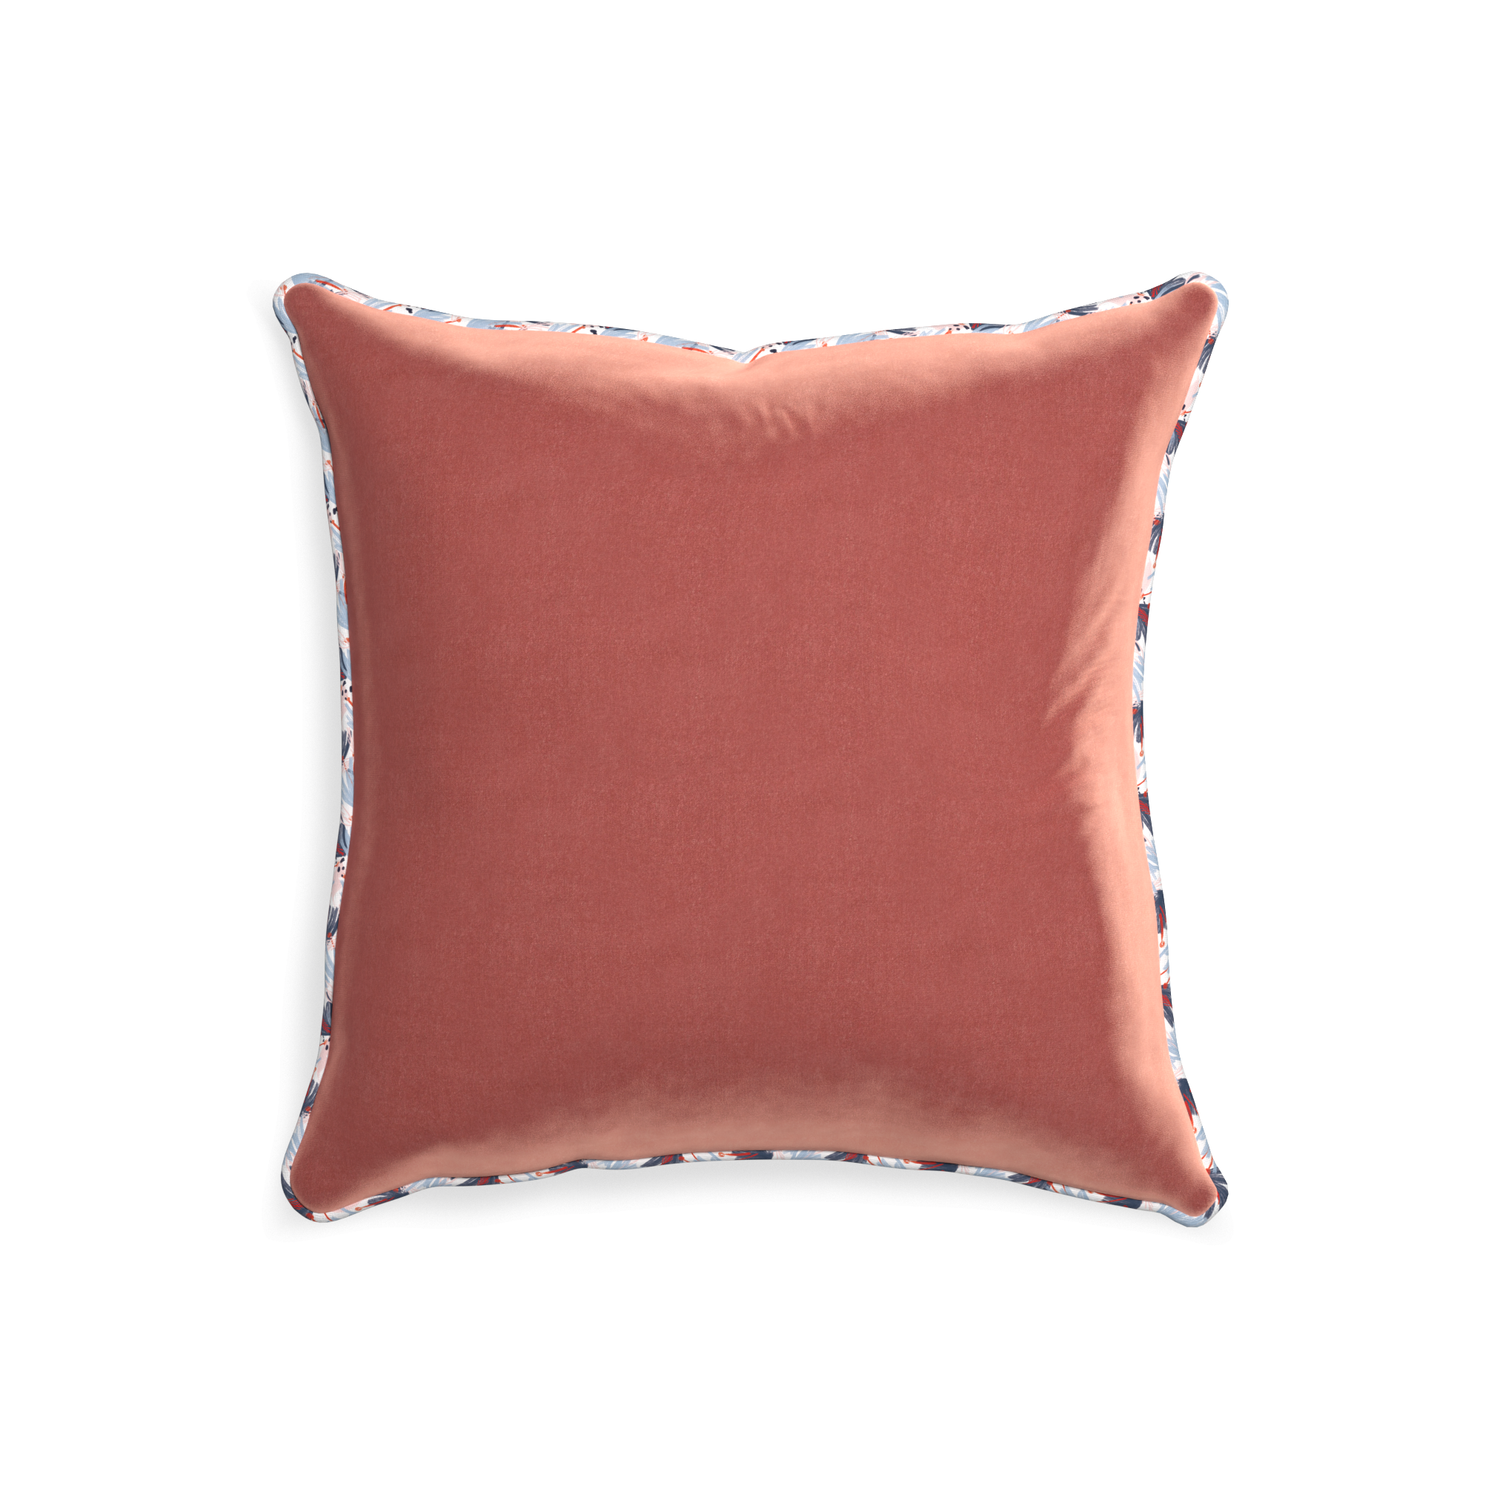 square coral velvet pillow with red and blue piping